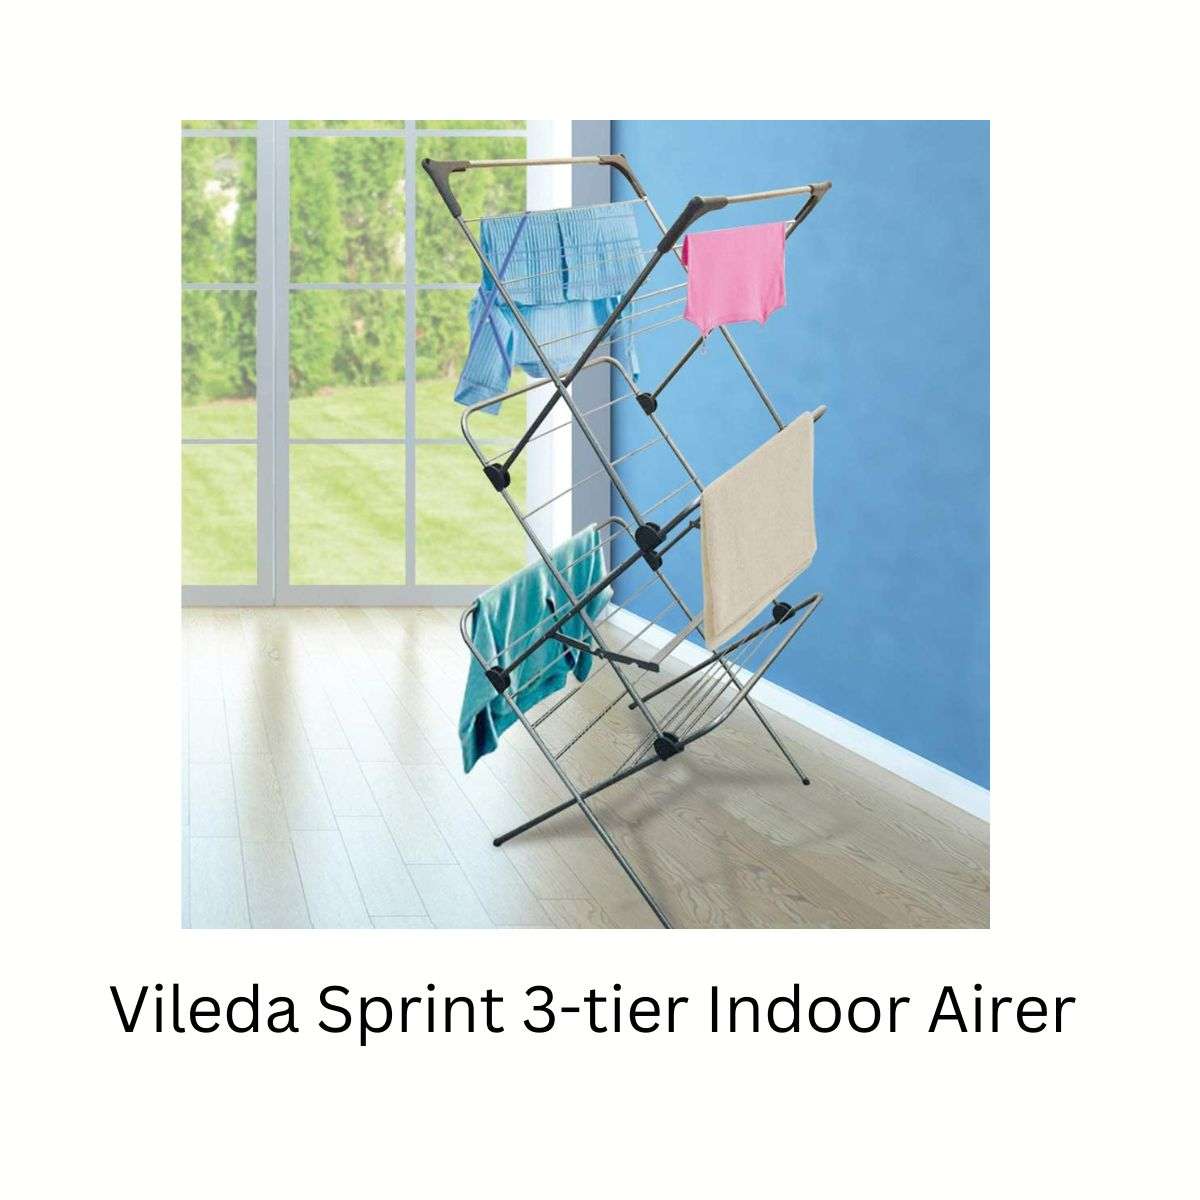 Vileda Sprint 3-tier Indoor Airer with clothes hanging on it